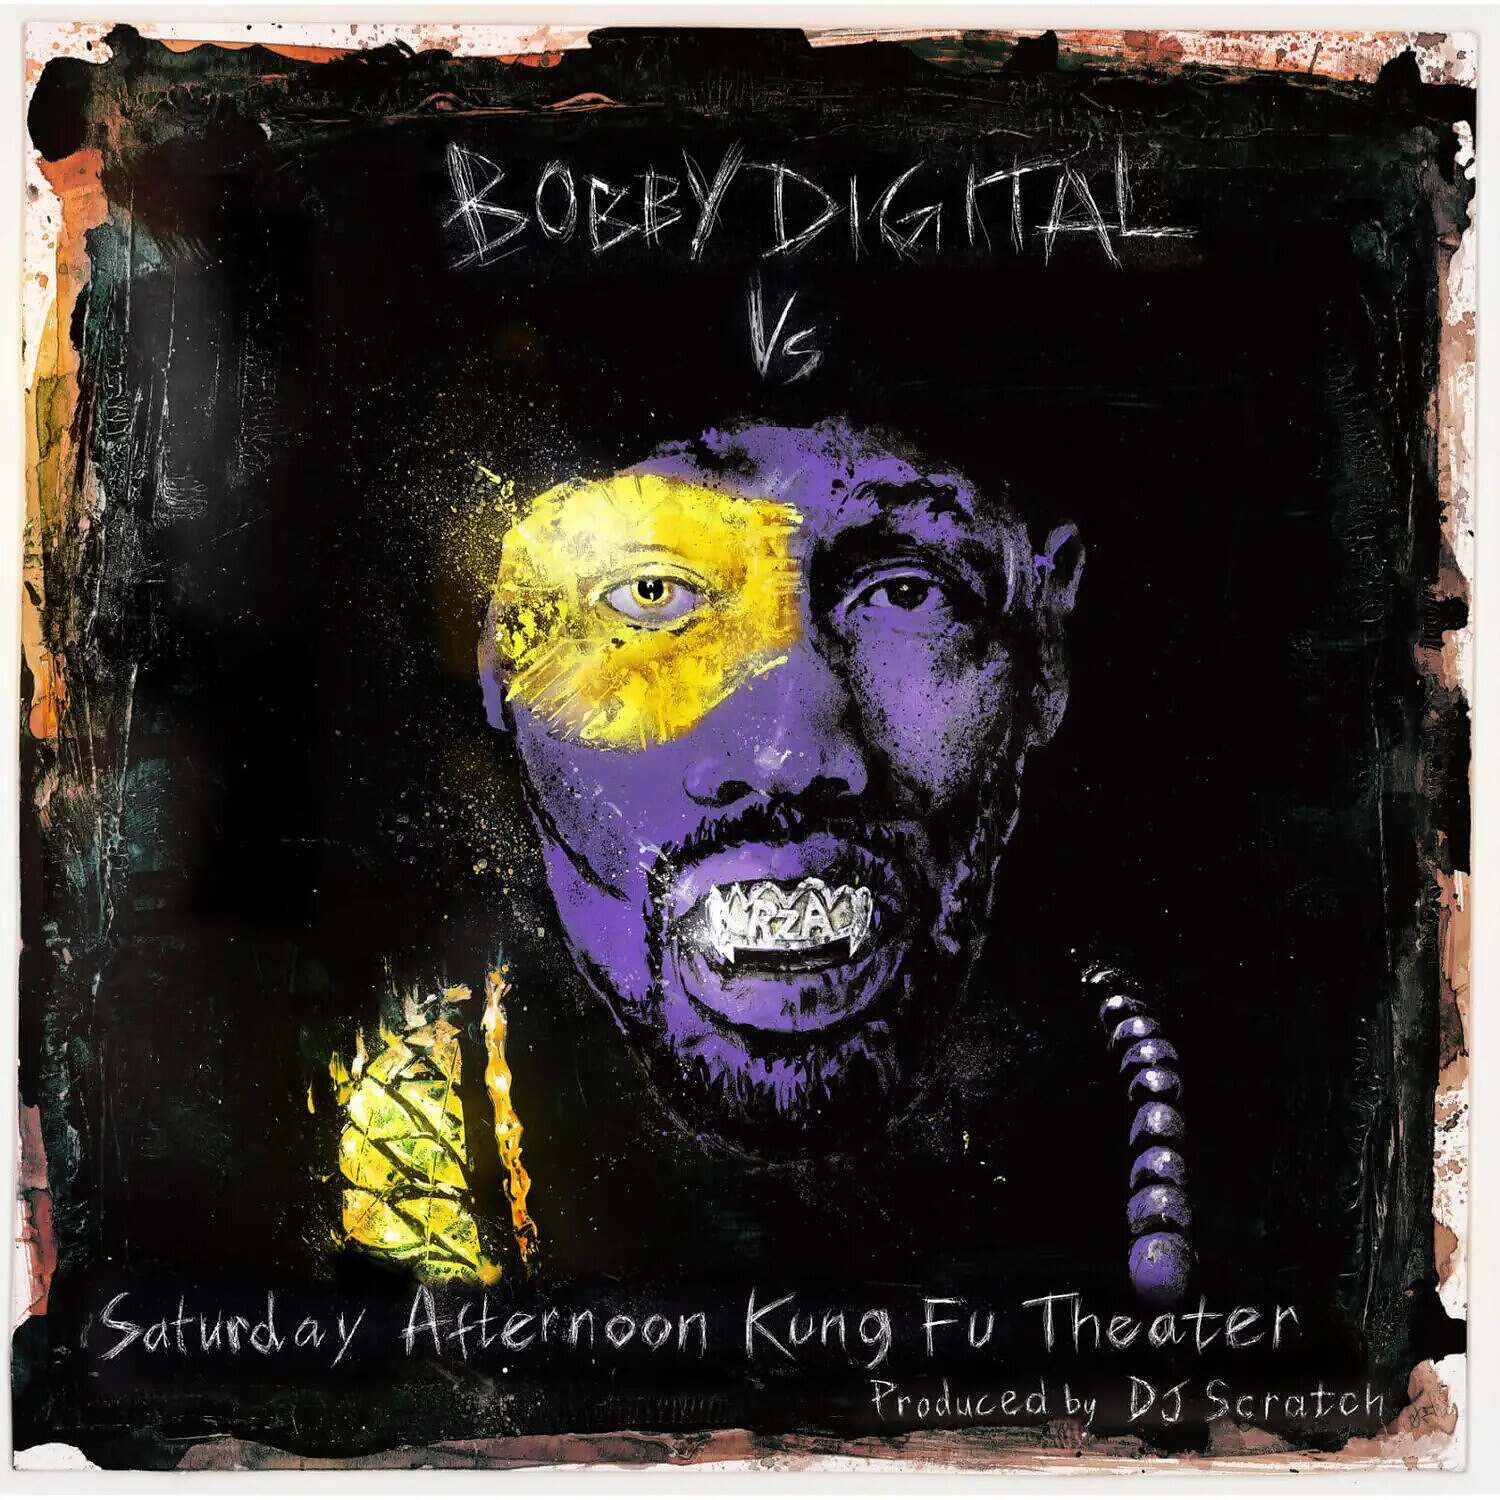 RZA & DJ Scratch Announce 'Saturday Afternoon Kung Fu Theater' Album + Drop Video For Title Track